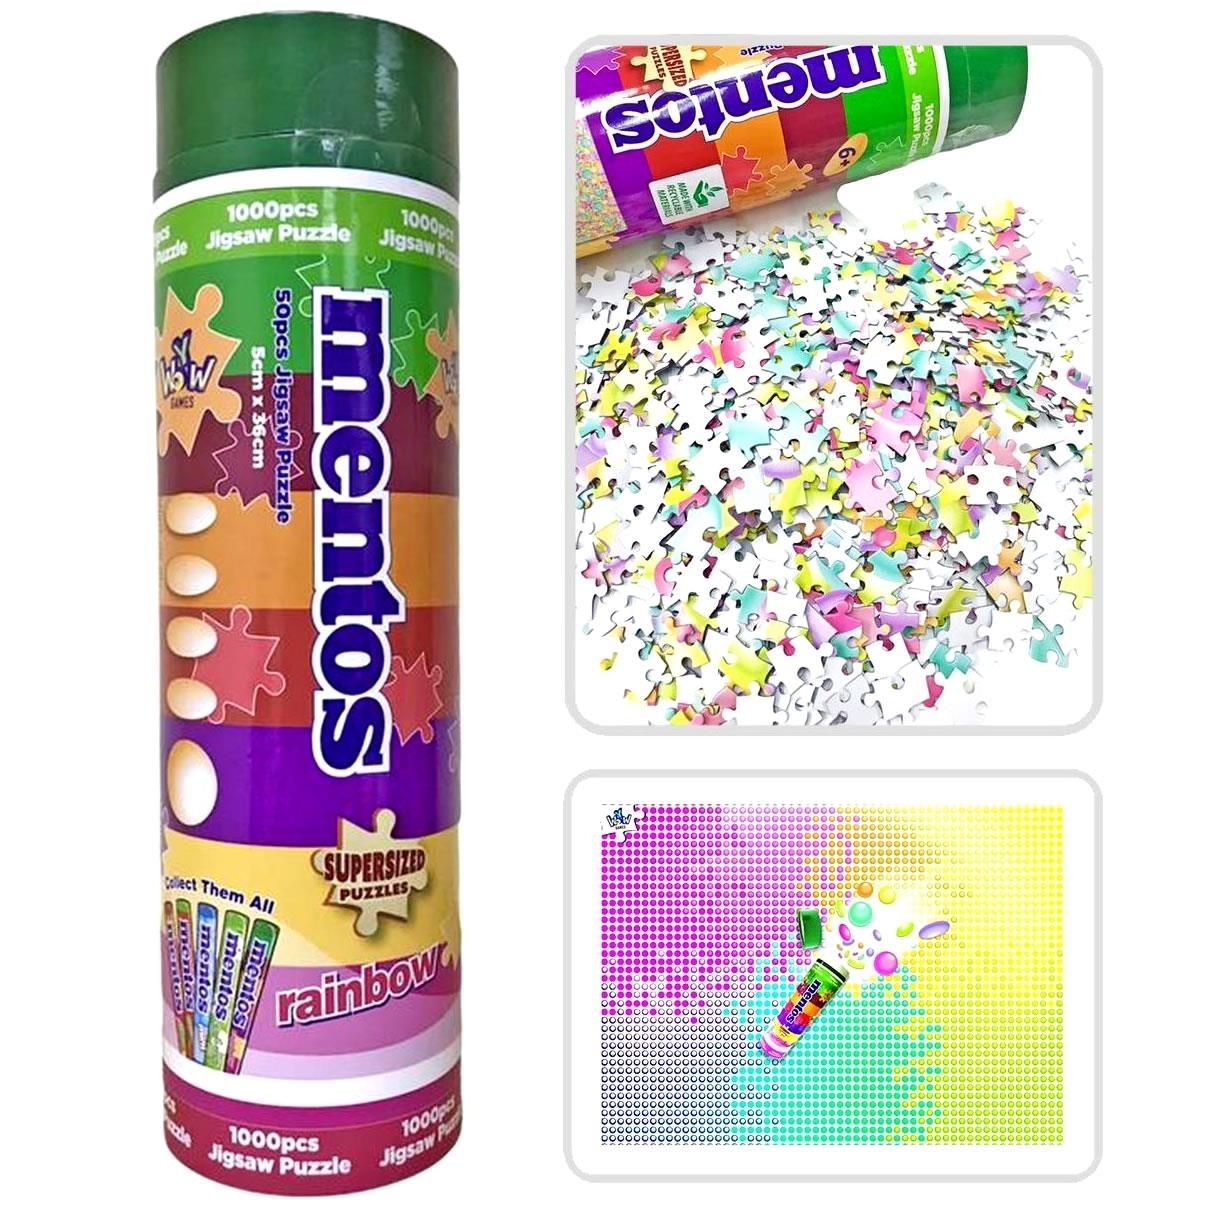 Mentos Rainbow Supersized 1,000pc Colorful Candy Jigsaw Puzzle 20x27 YWOW